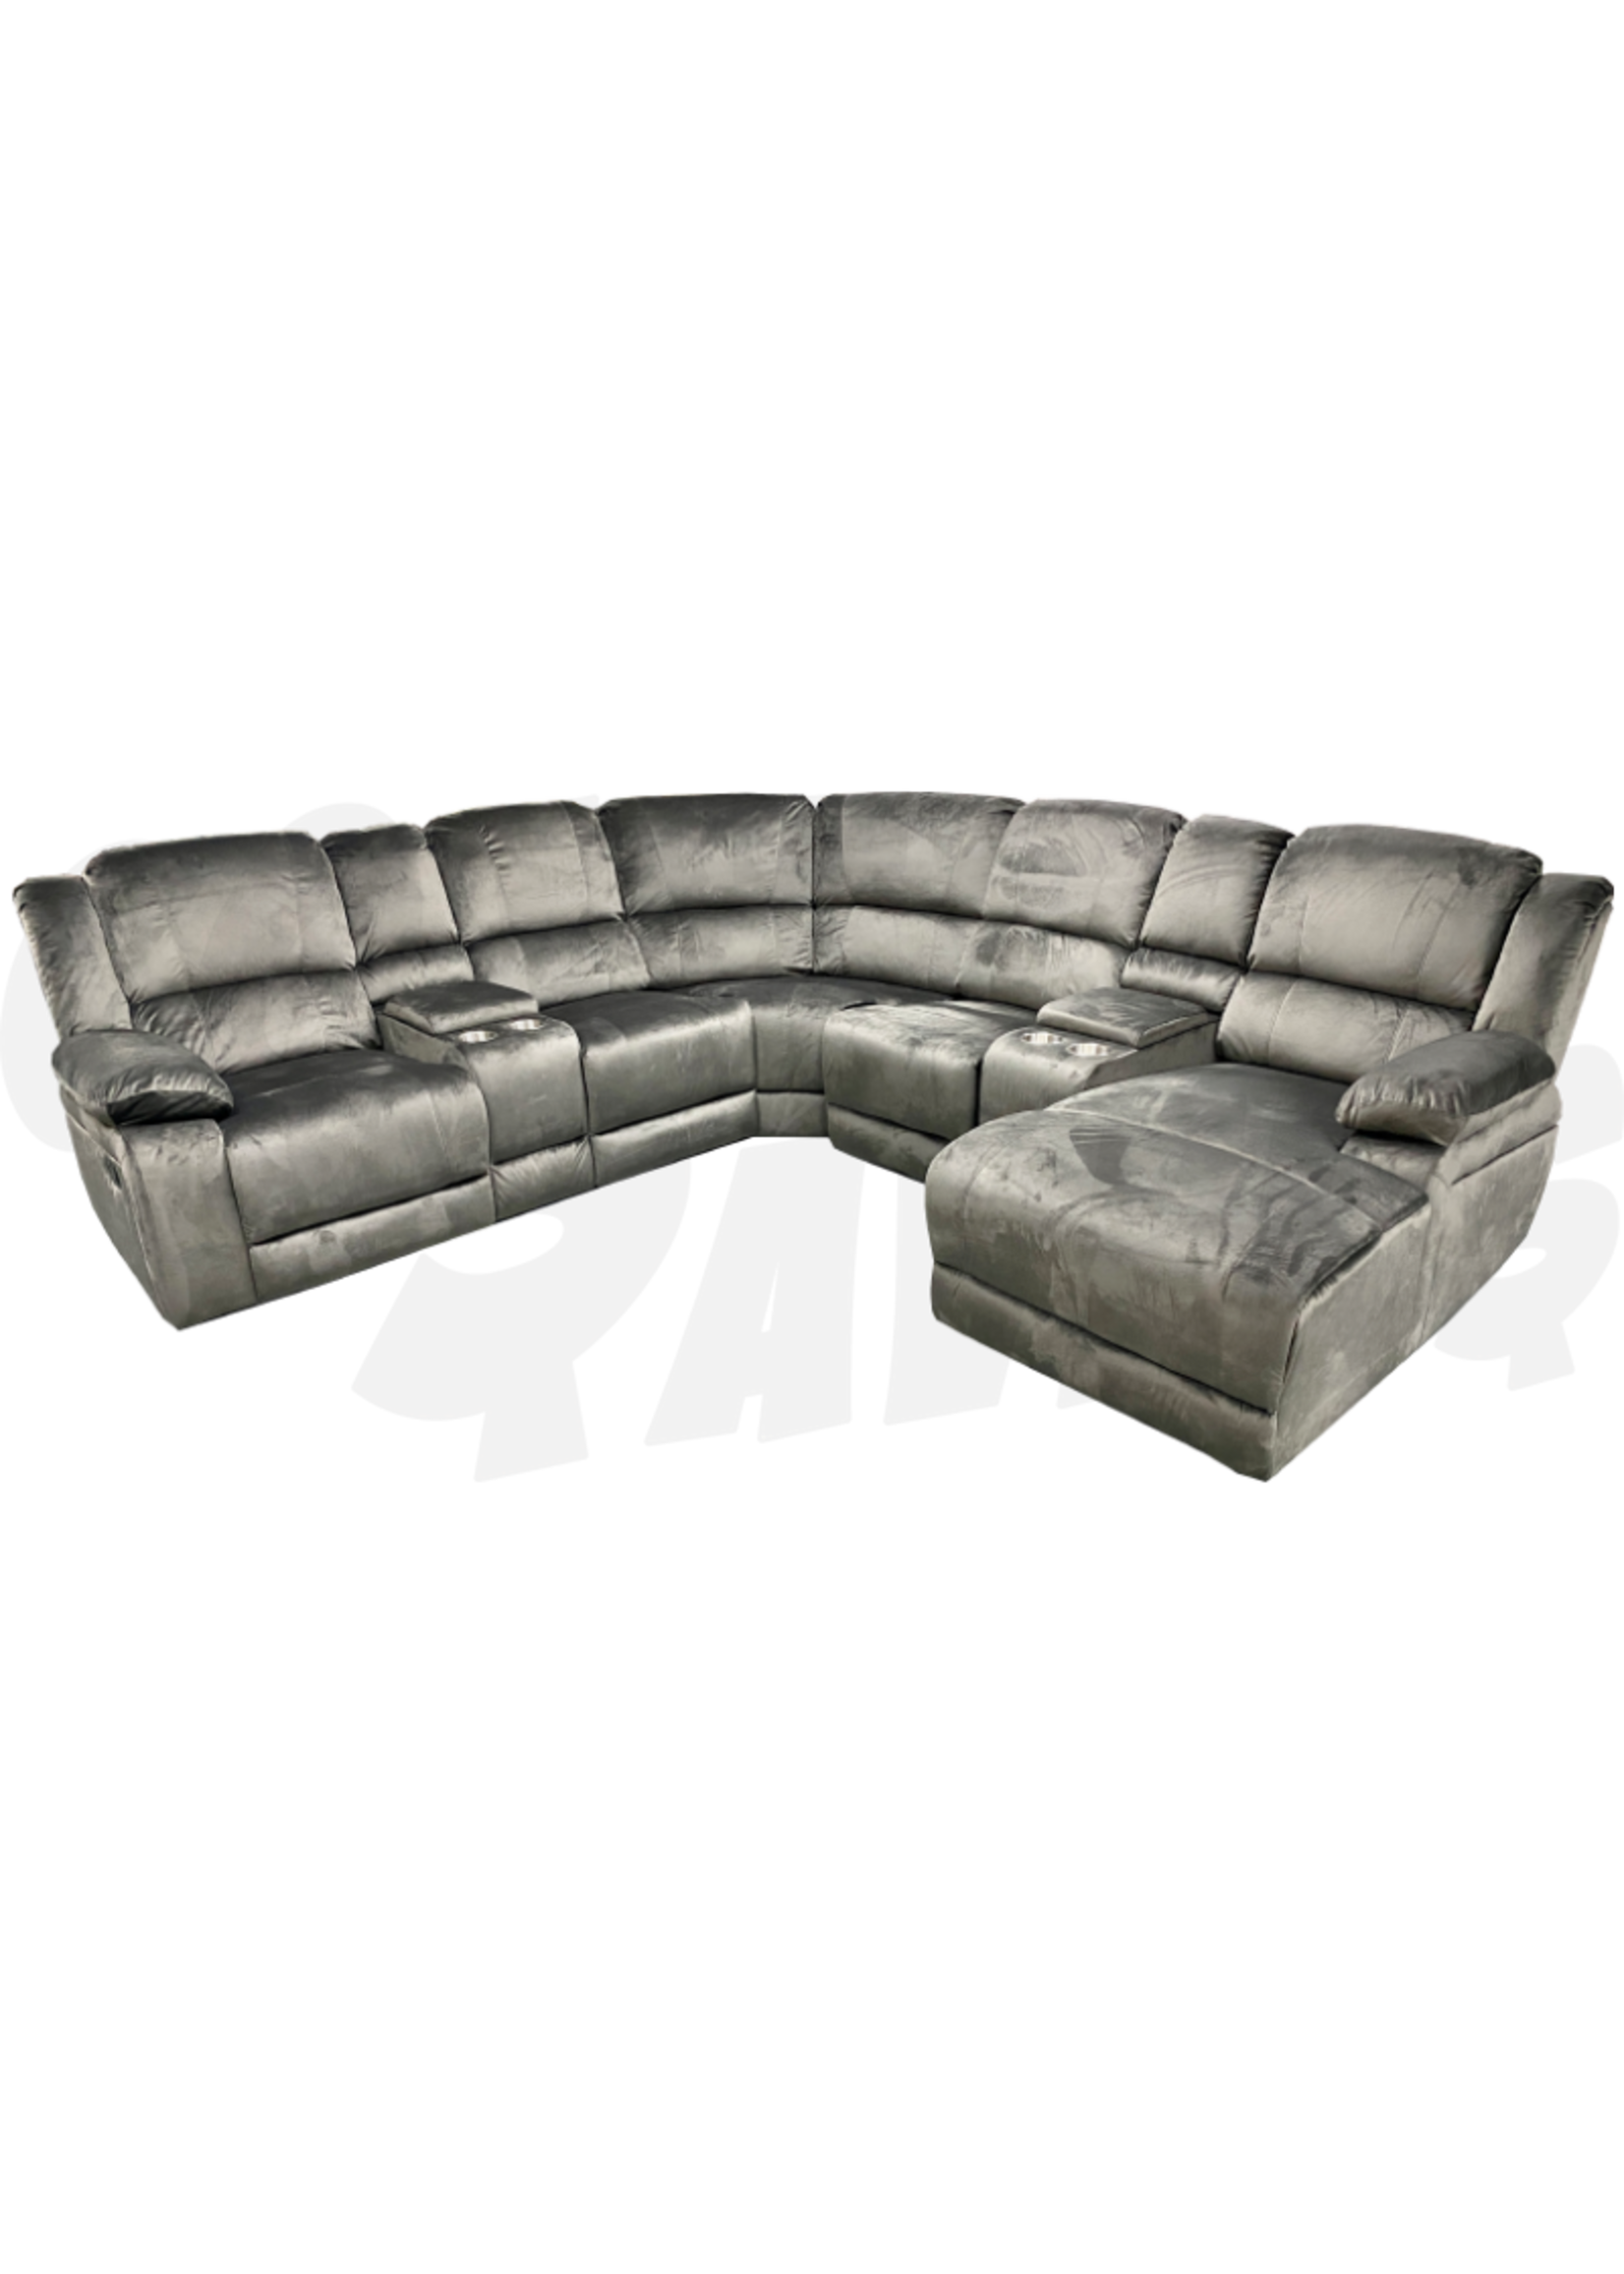 Aspen Collection Euphoria Sectional Sofa w/ Cup Holders (Grey)